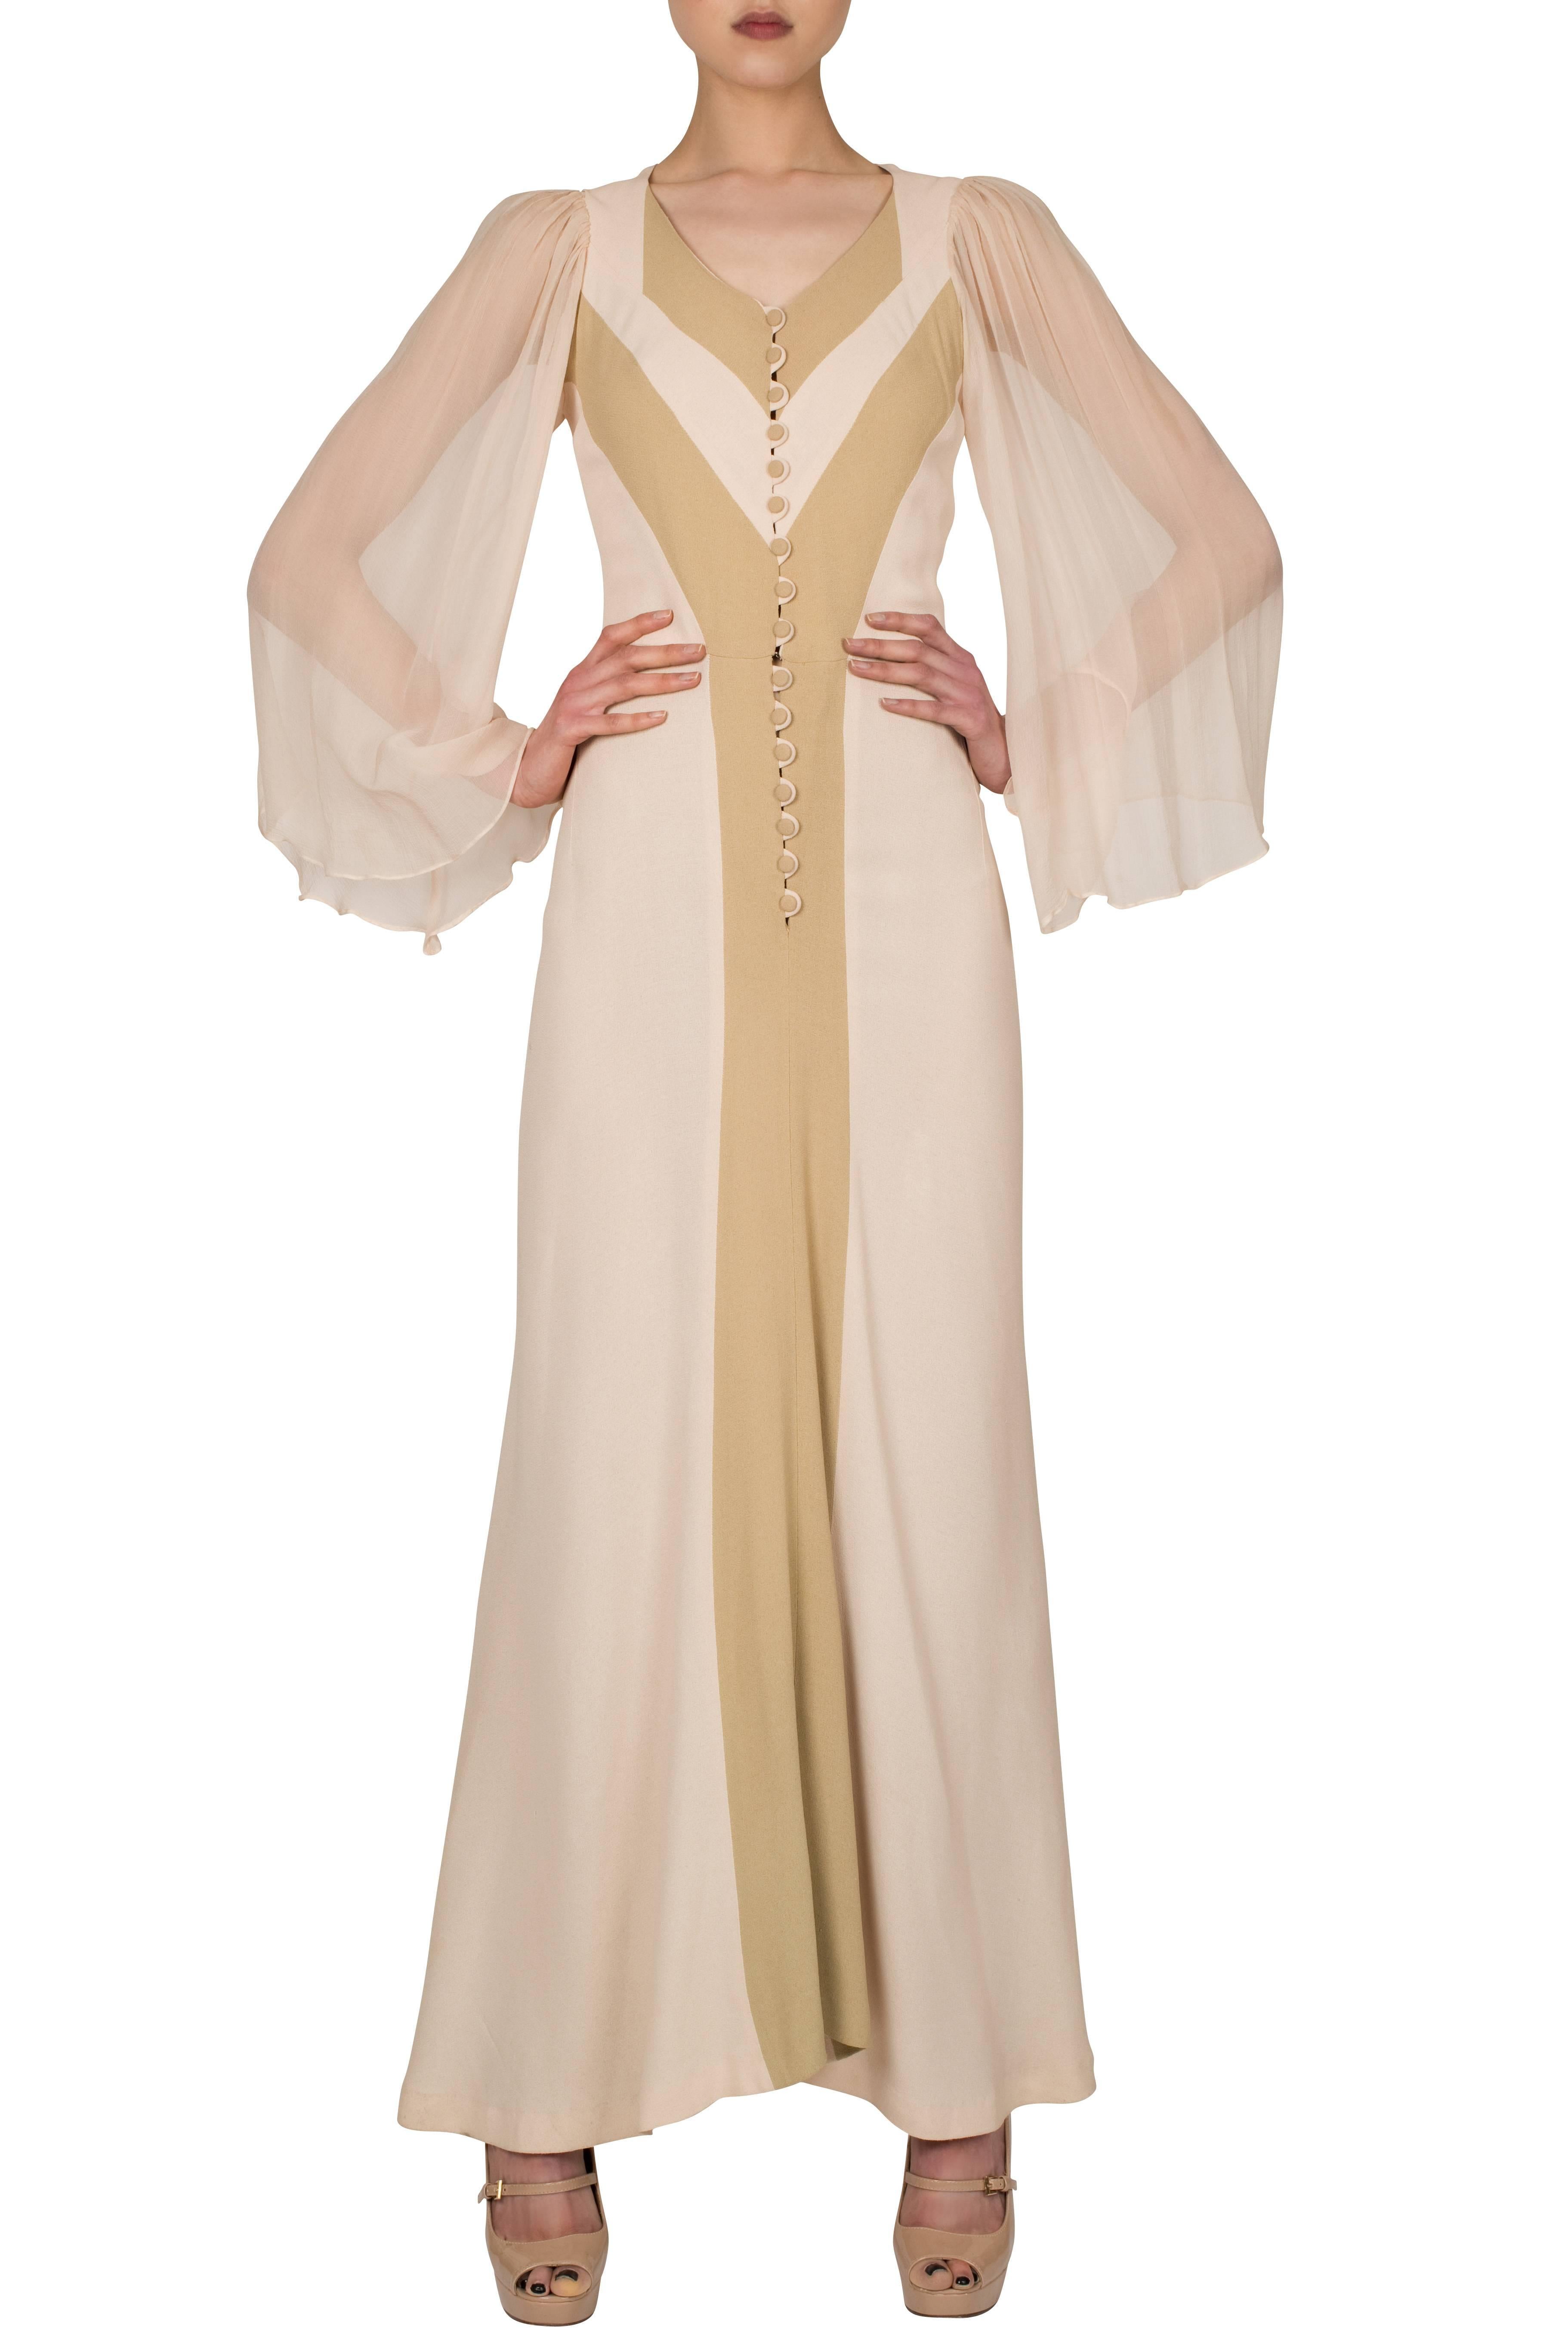 This particular Alice Pollock dress evokes the 30’s deco design whilst remaining true to its bohemian surroundings. The weighty moss crepe contrasts with the floaty, diaphanous chiffon sleeves.

As well as her own designs, Alice Pollock is